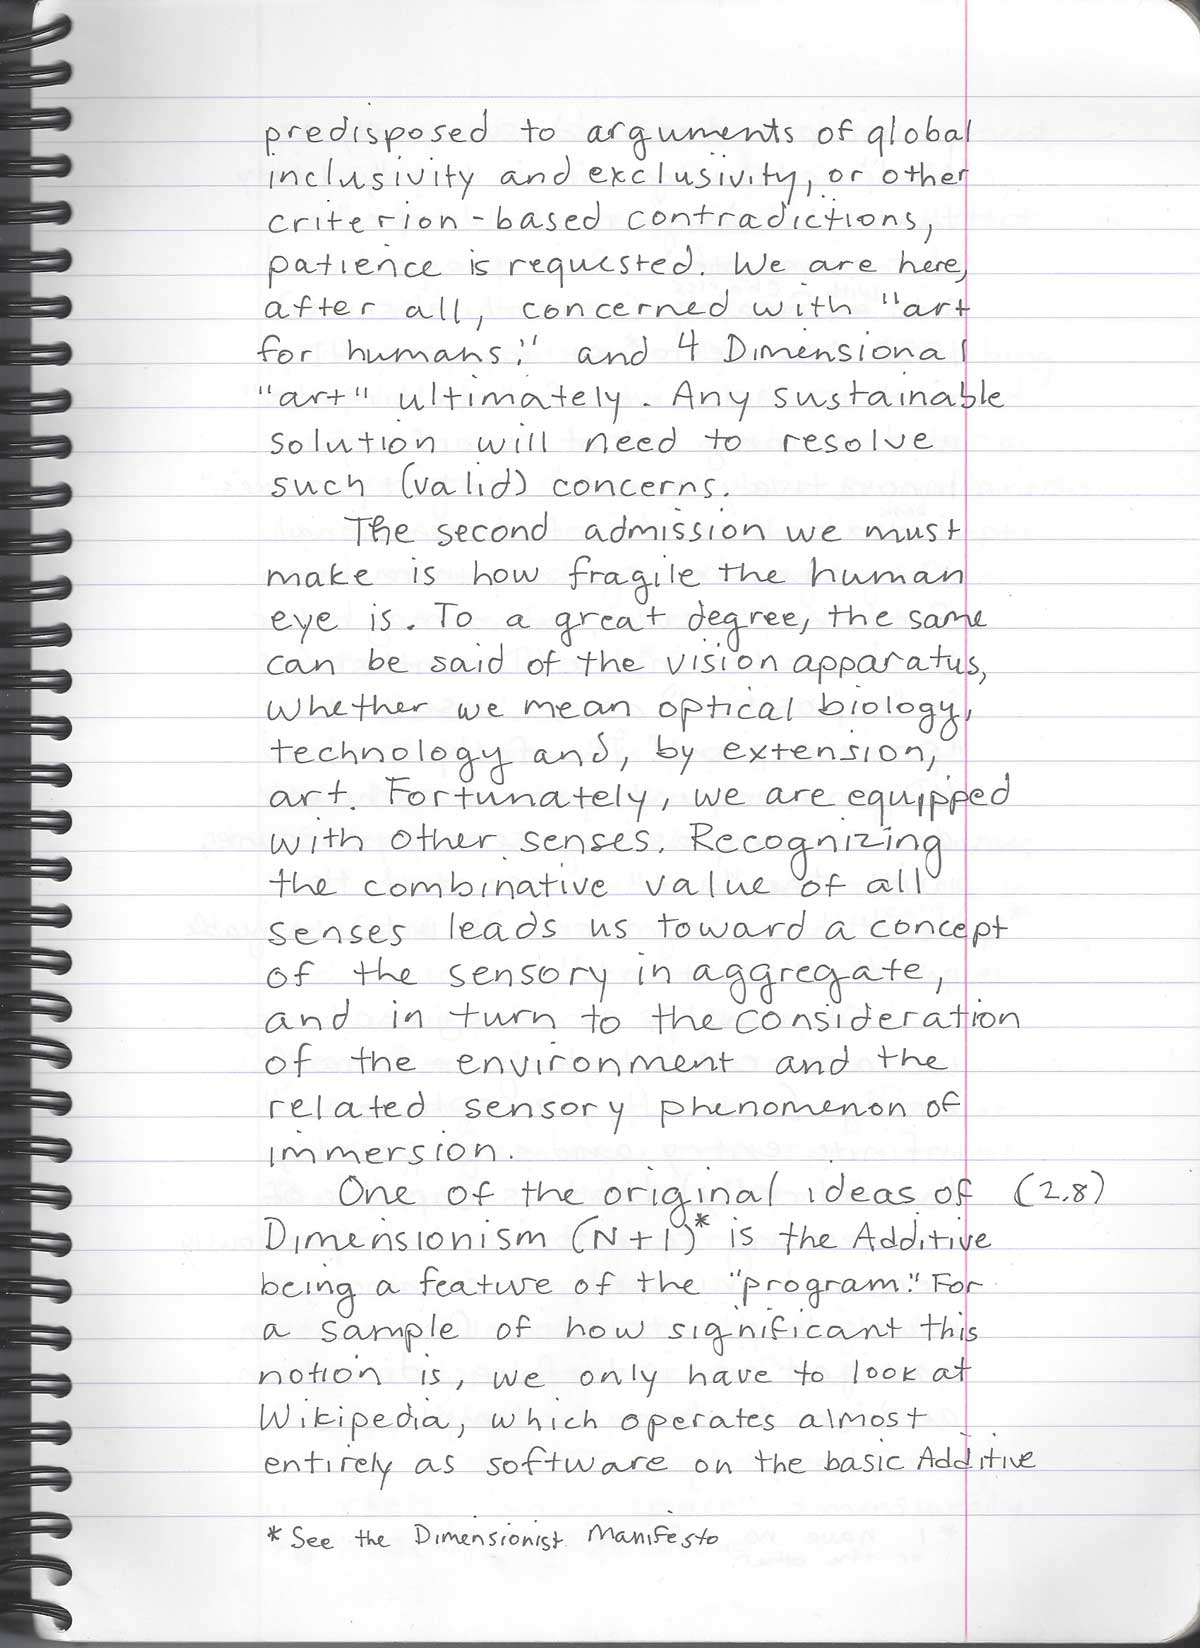 Link to scanned notebook page